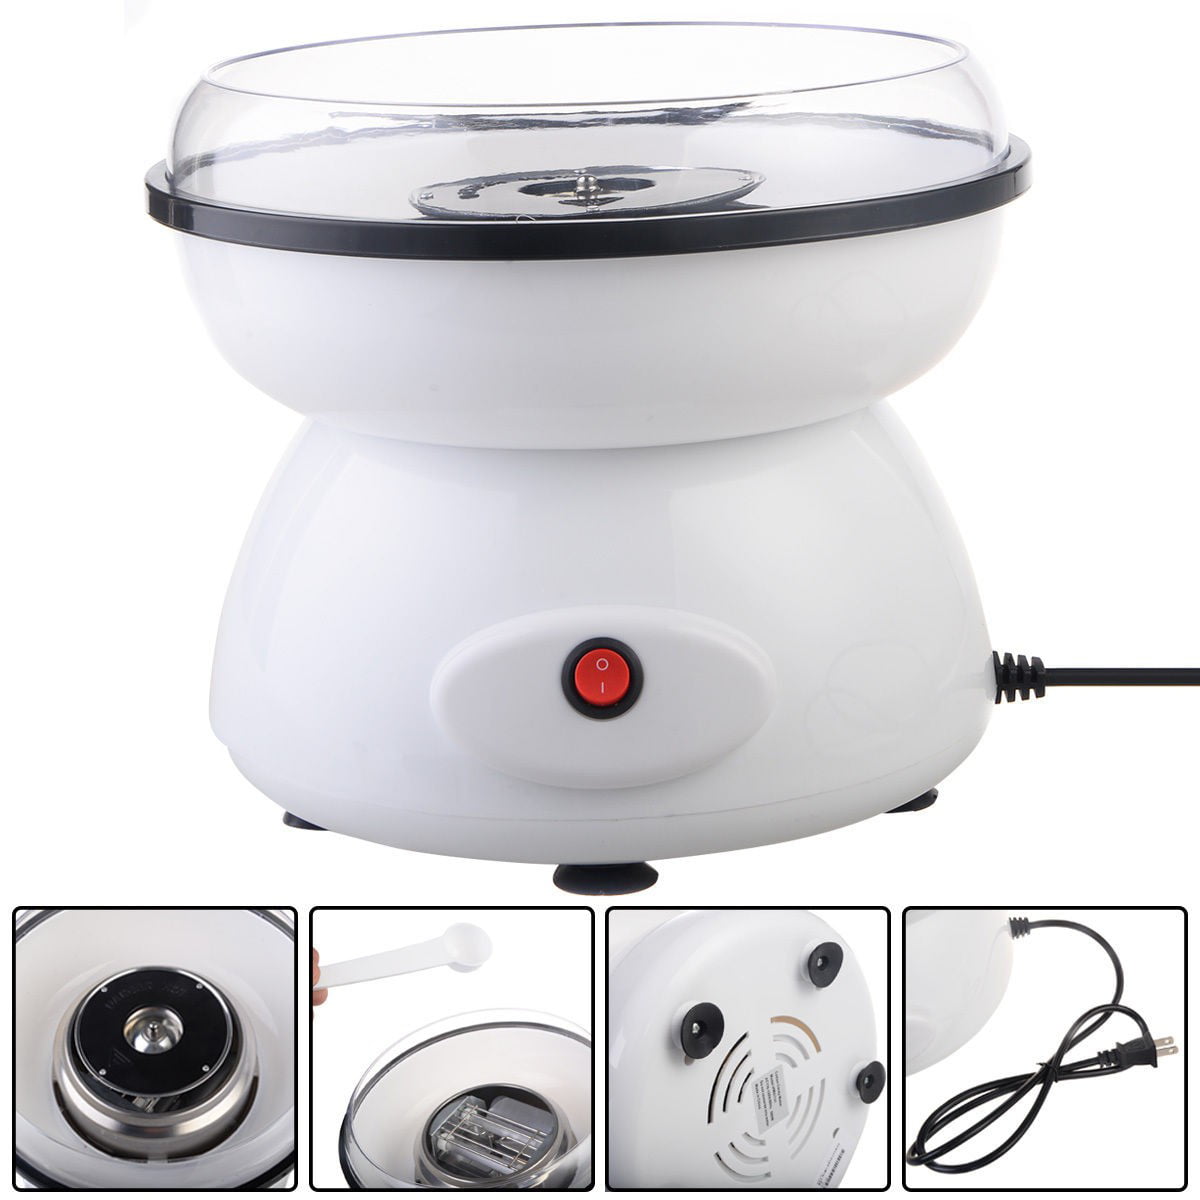 Details about   Mini Electric Cotton Candy Machine White Floss Carnival Commercial Maker Party 